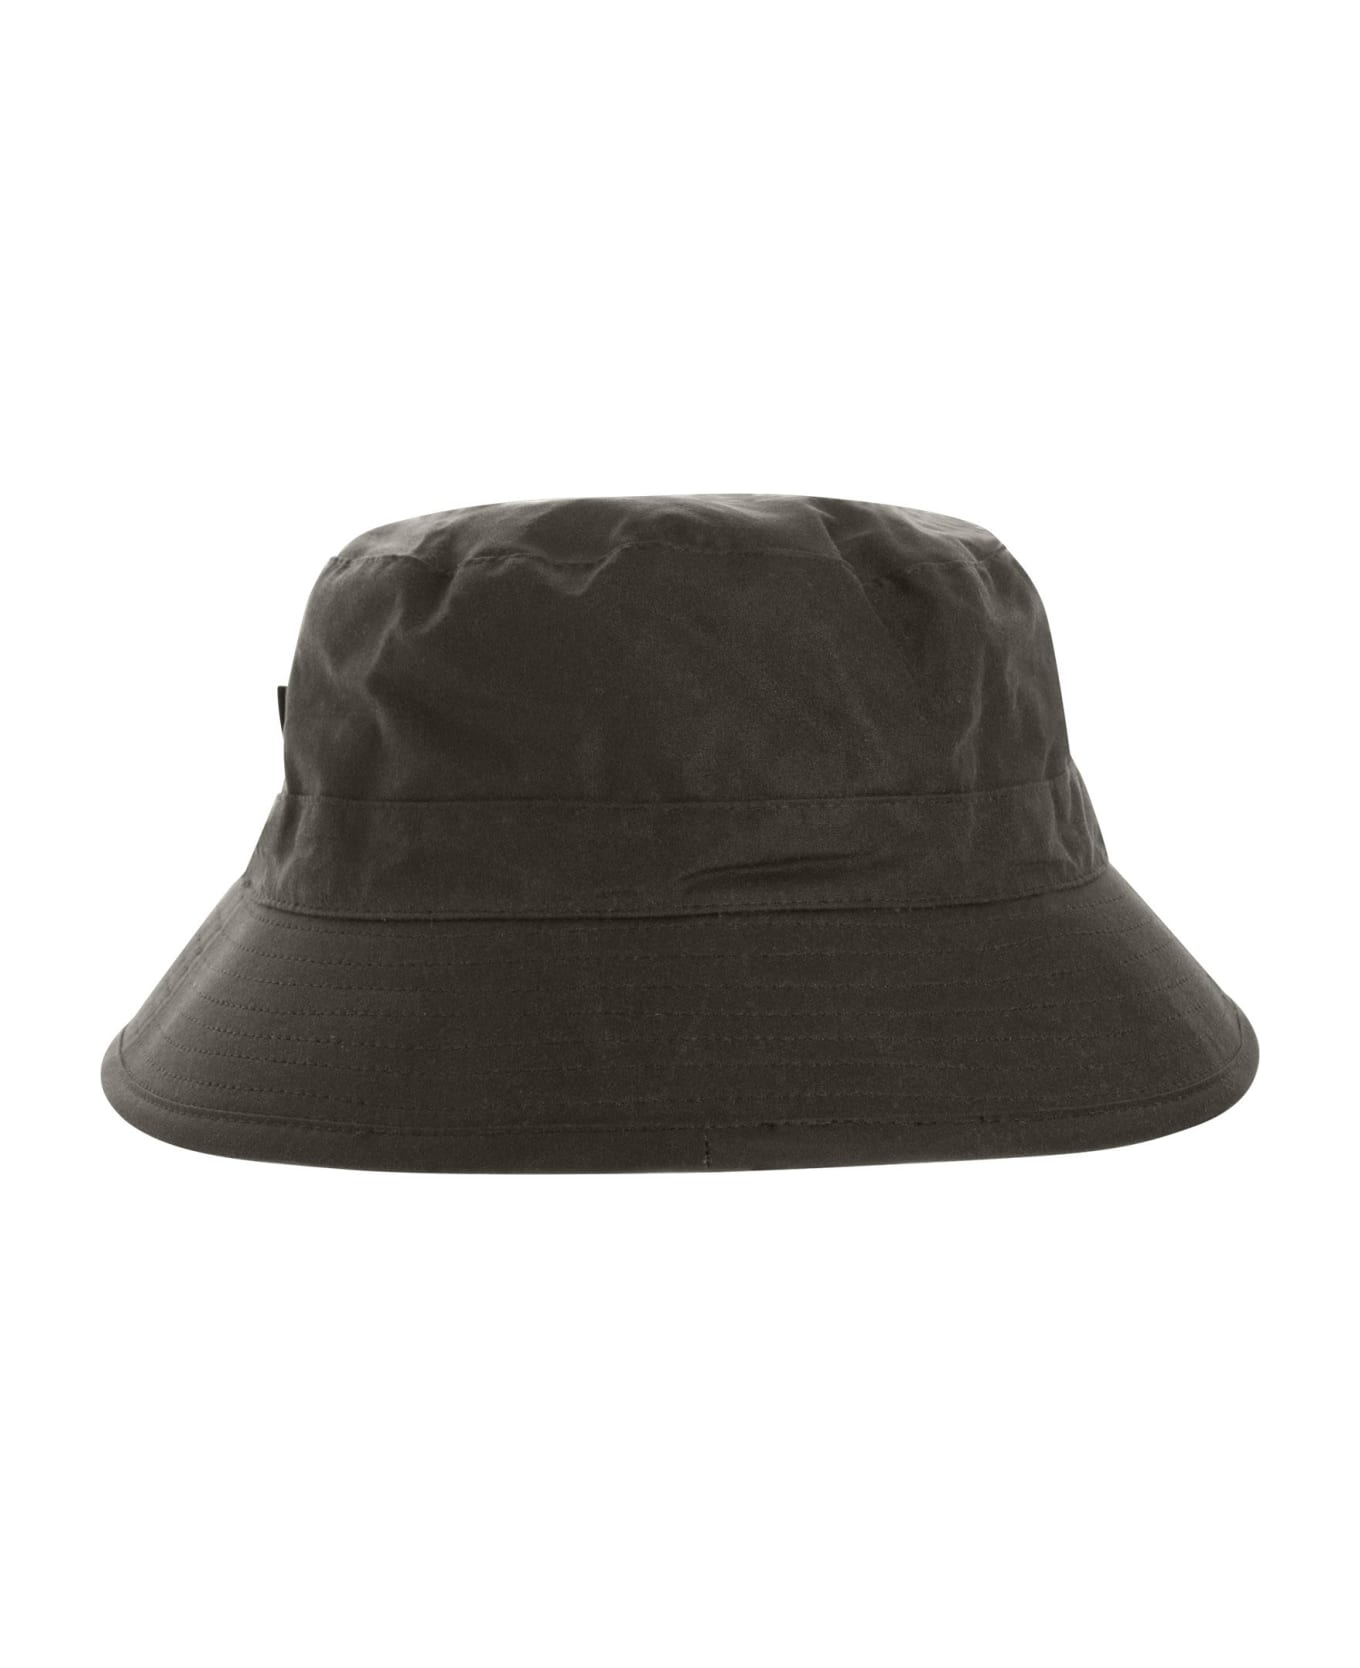 Barbour Sporthut Wax - Hat - Olive Green